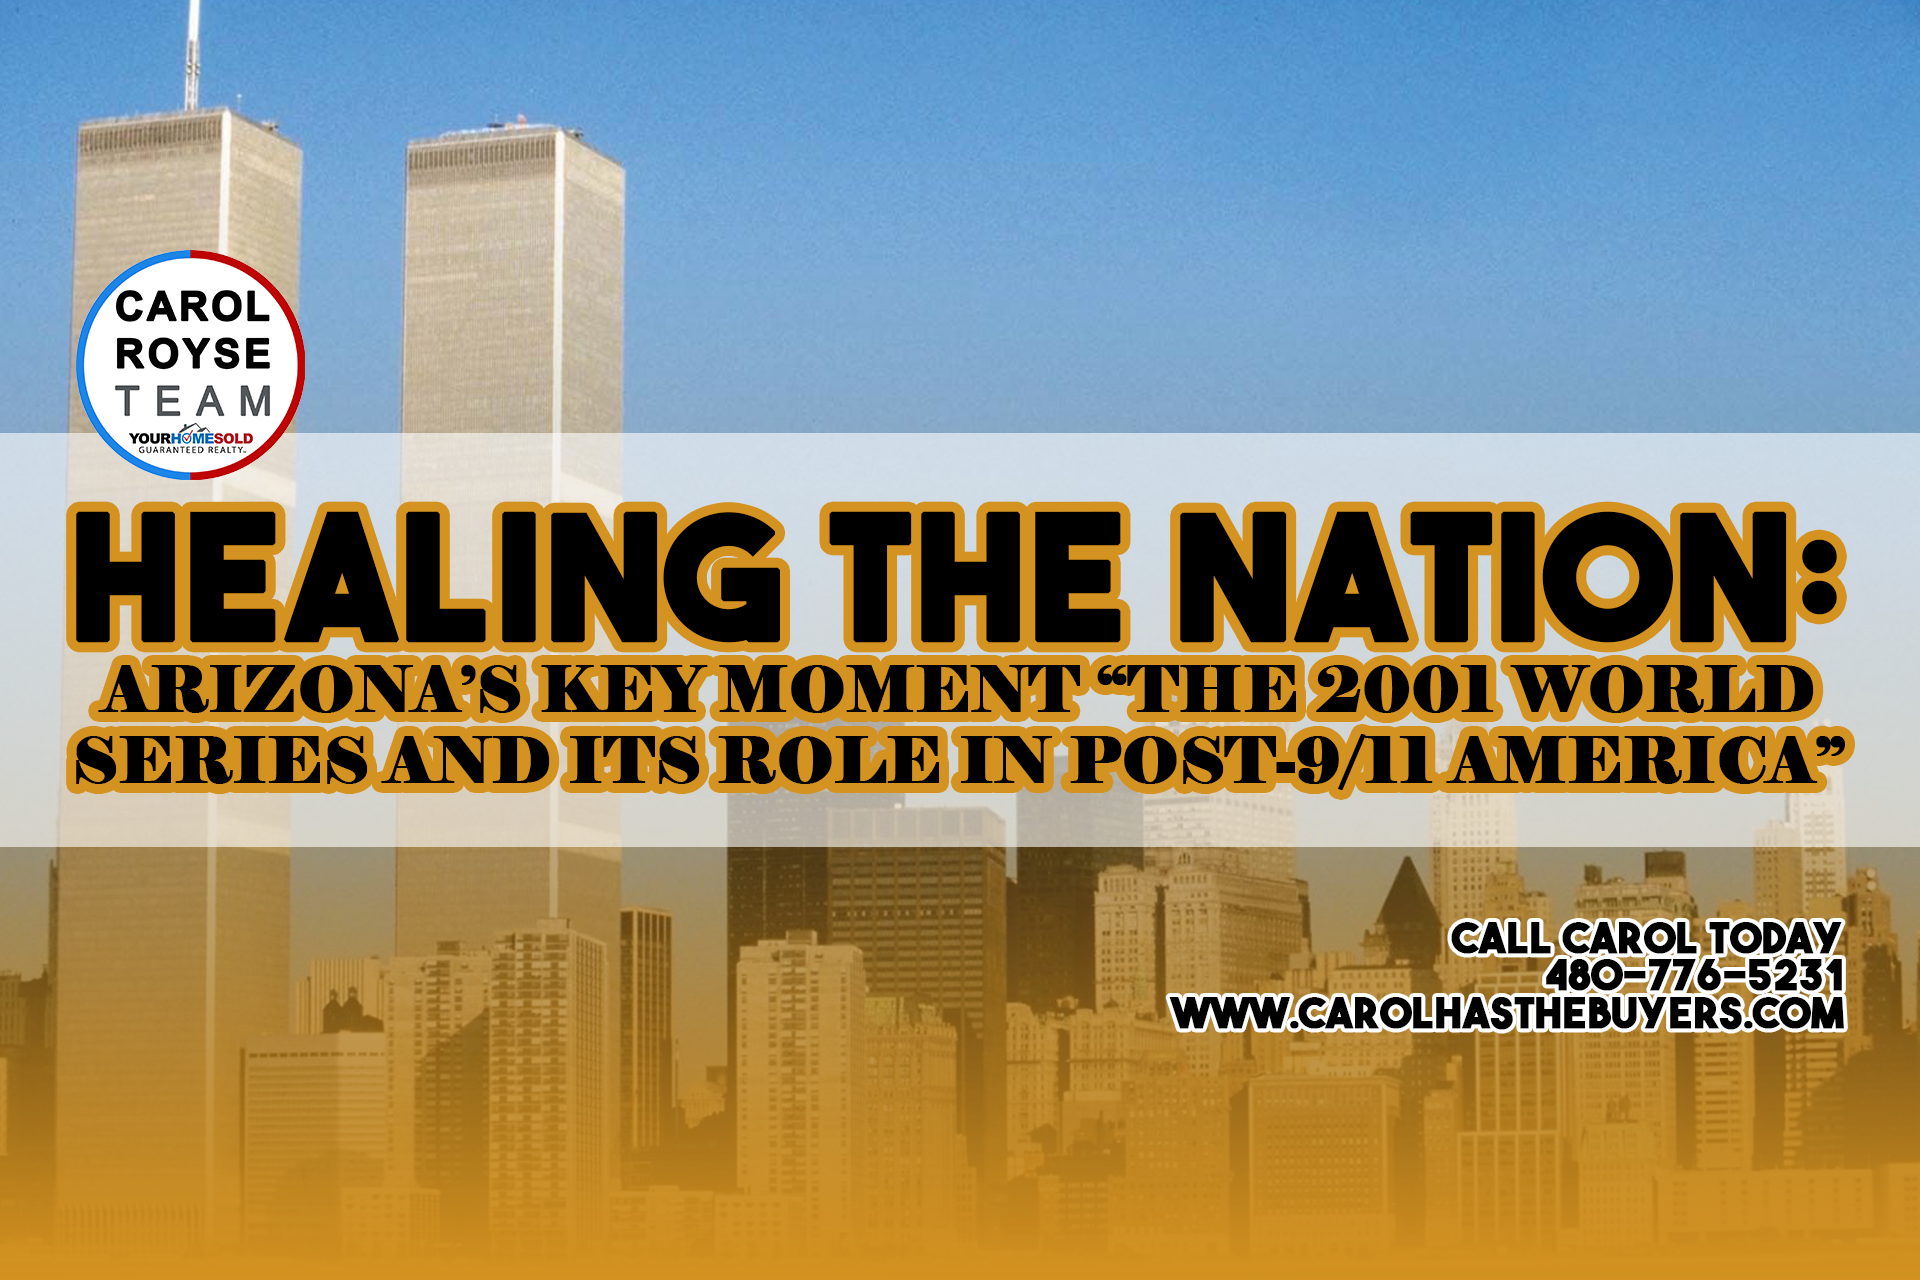 Healing the Nation: Arizona’s Key Moment “The 2001 World Series and Its Role in Post-9/11 America”